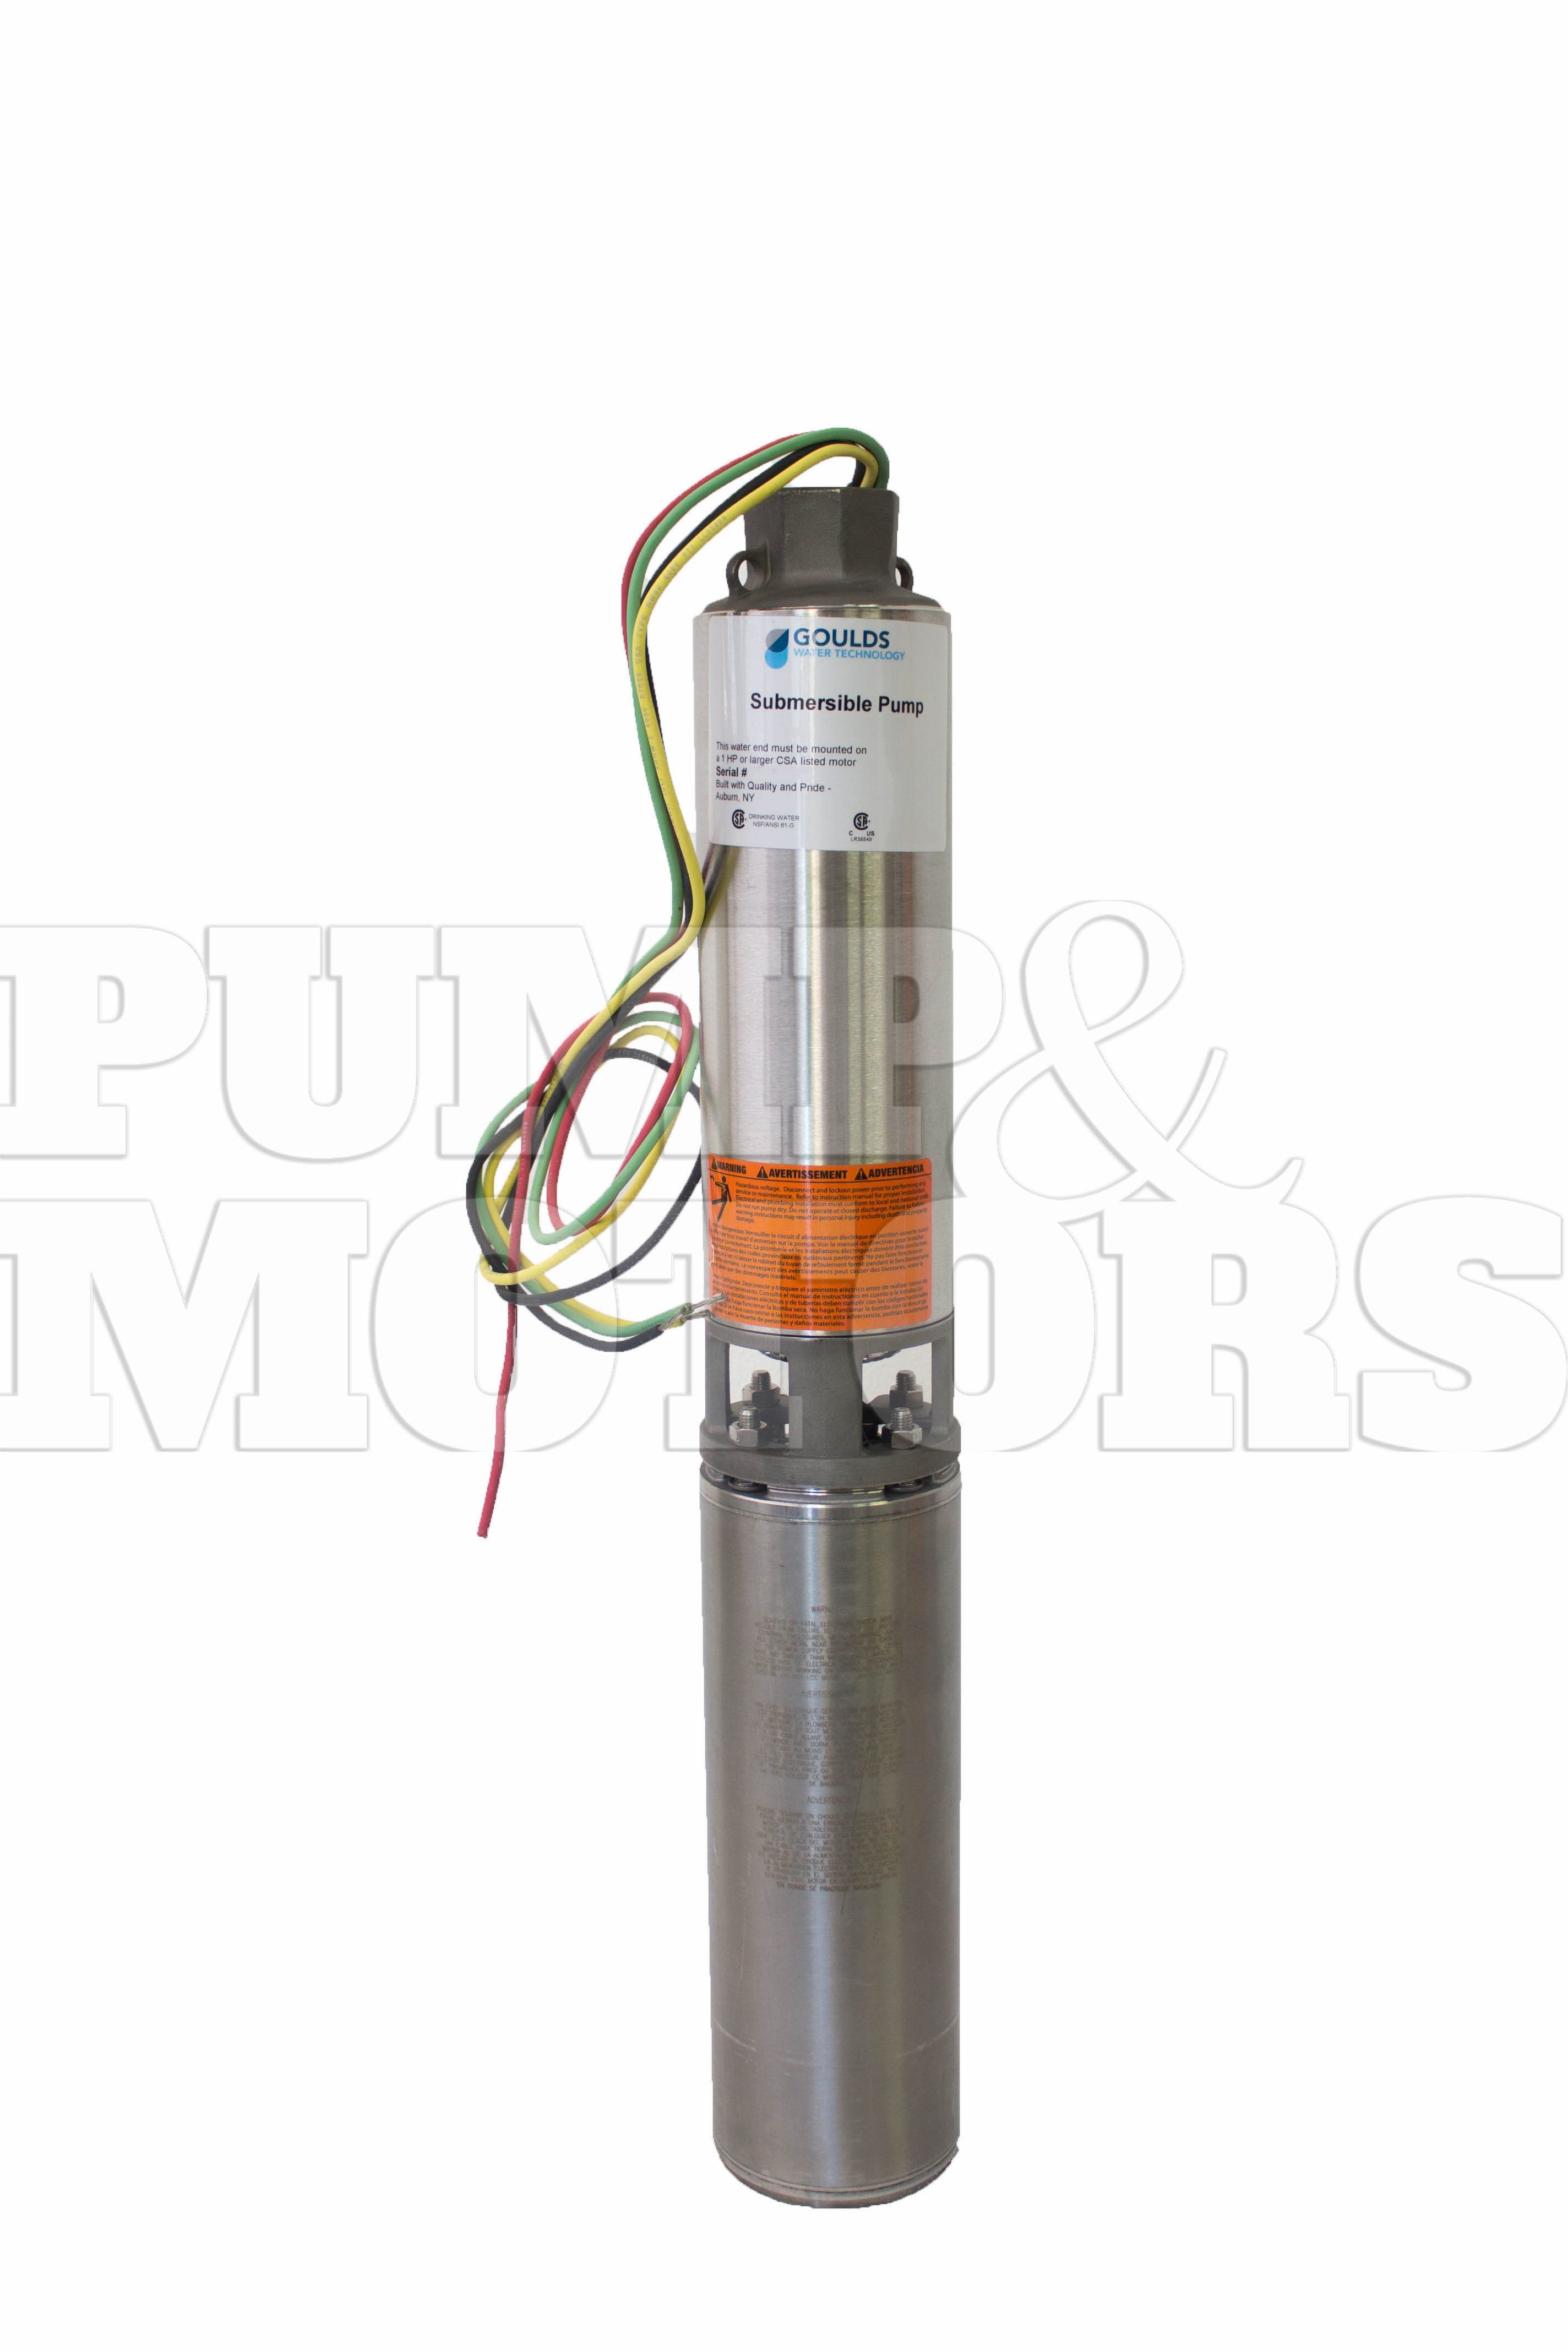 Goulds 55GS15434C 1.5HP Submersible Water Well Pump & Motor 460V